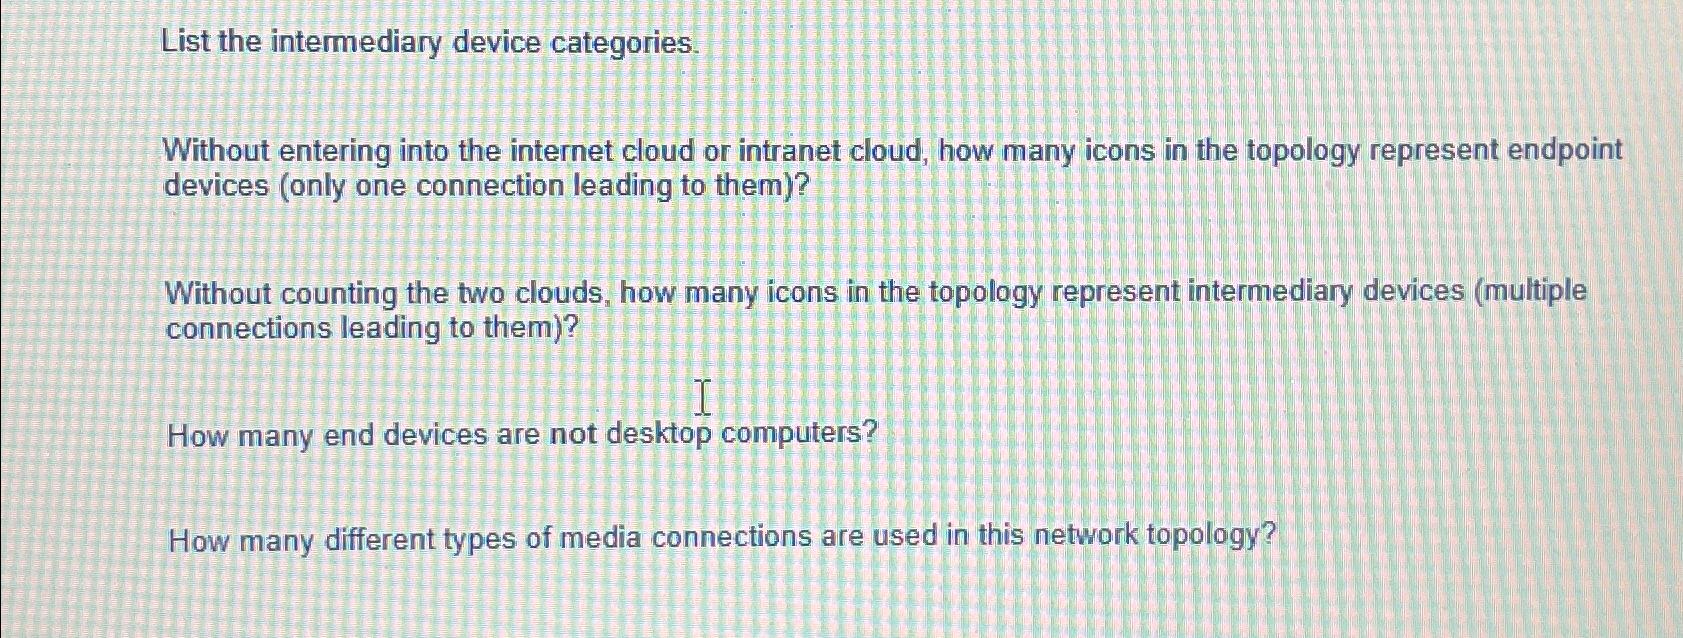 List the intermediary device categories. Without entering into the internet cloud or intranet cloud, how many